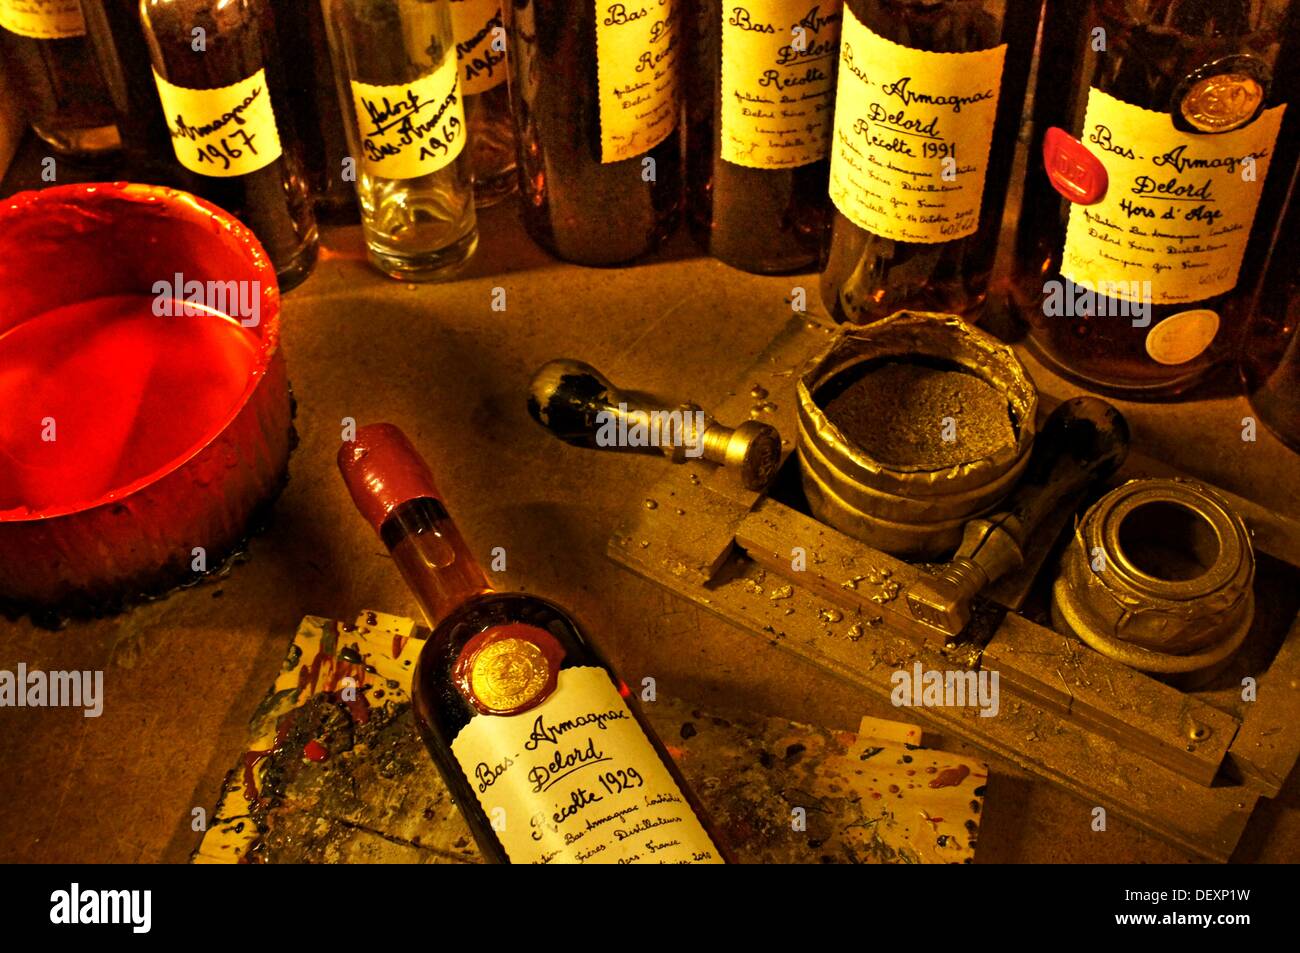 Handmade labeling of the old armagnac of the Armagnac Delord family estate, at Lannepax, Gers, Midi-Pyrenees, France Stock Photo